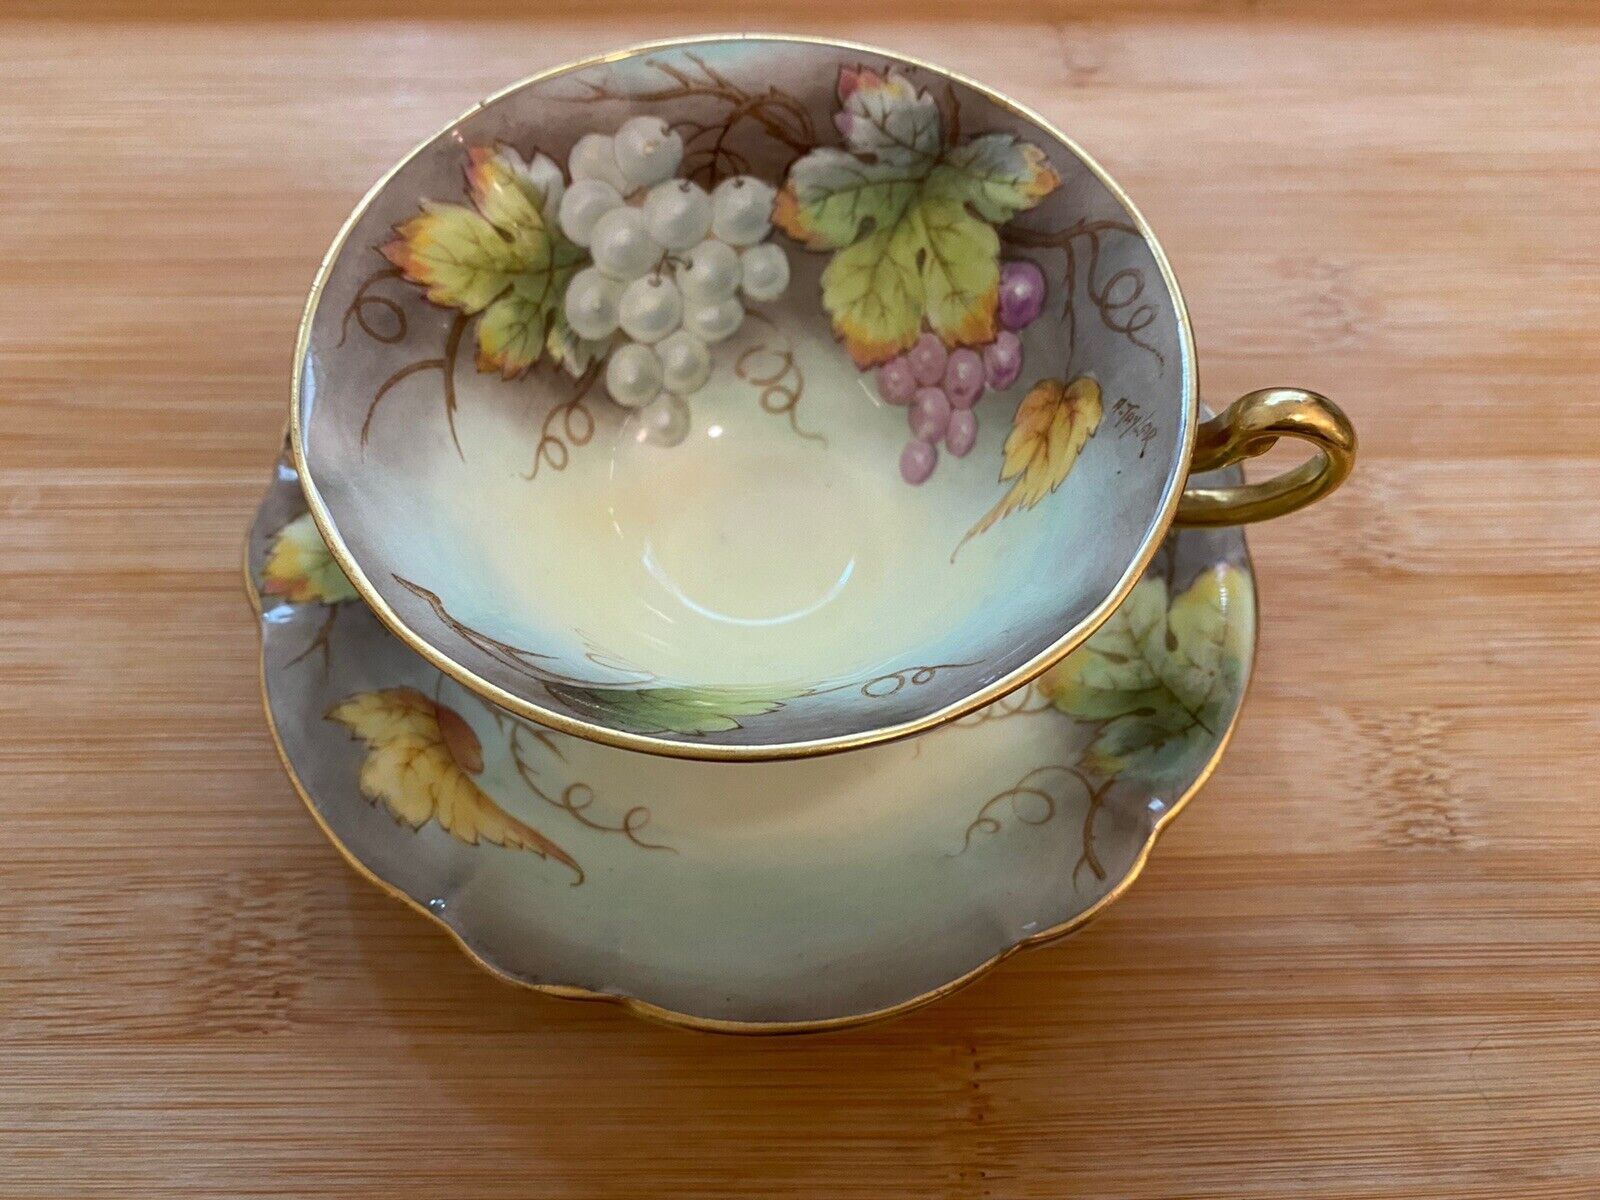 EB Foley Shelley RARE Hand Painted Orchard Fruit Signed Artist Cup Teacup Saucer